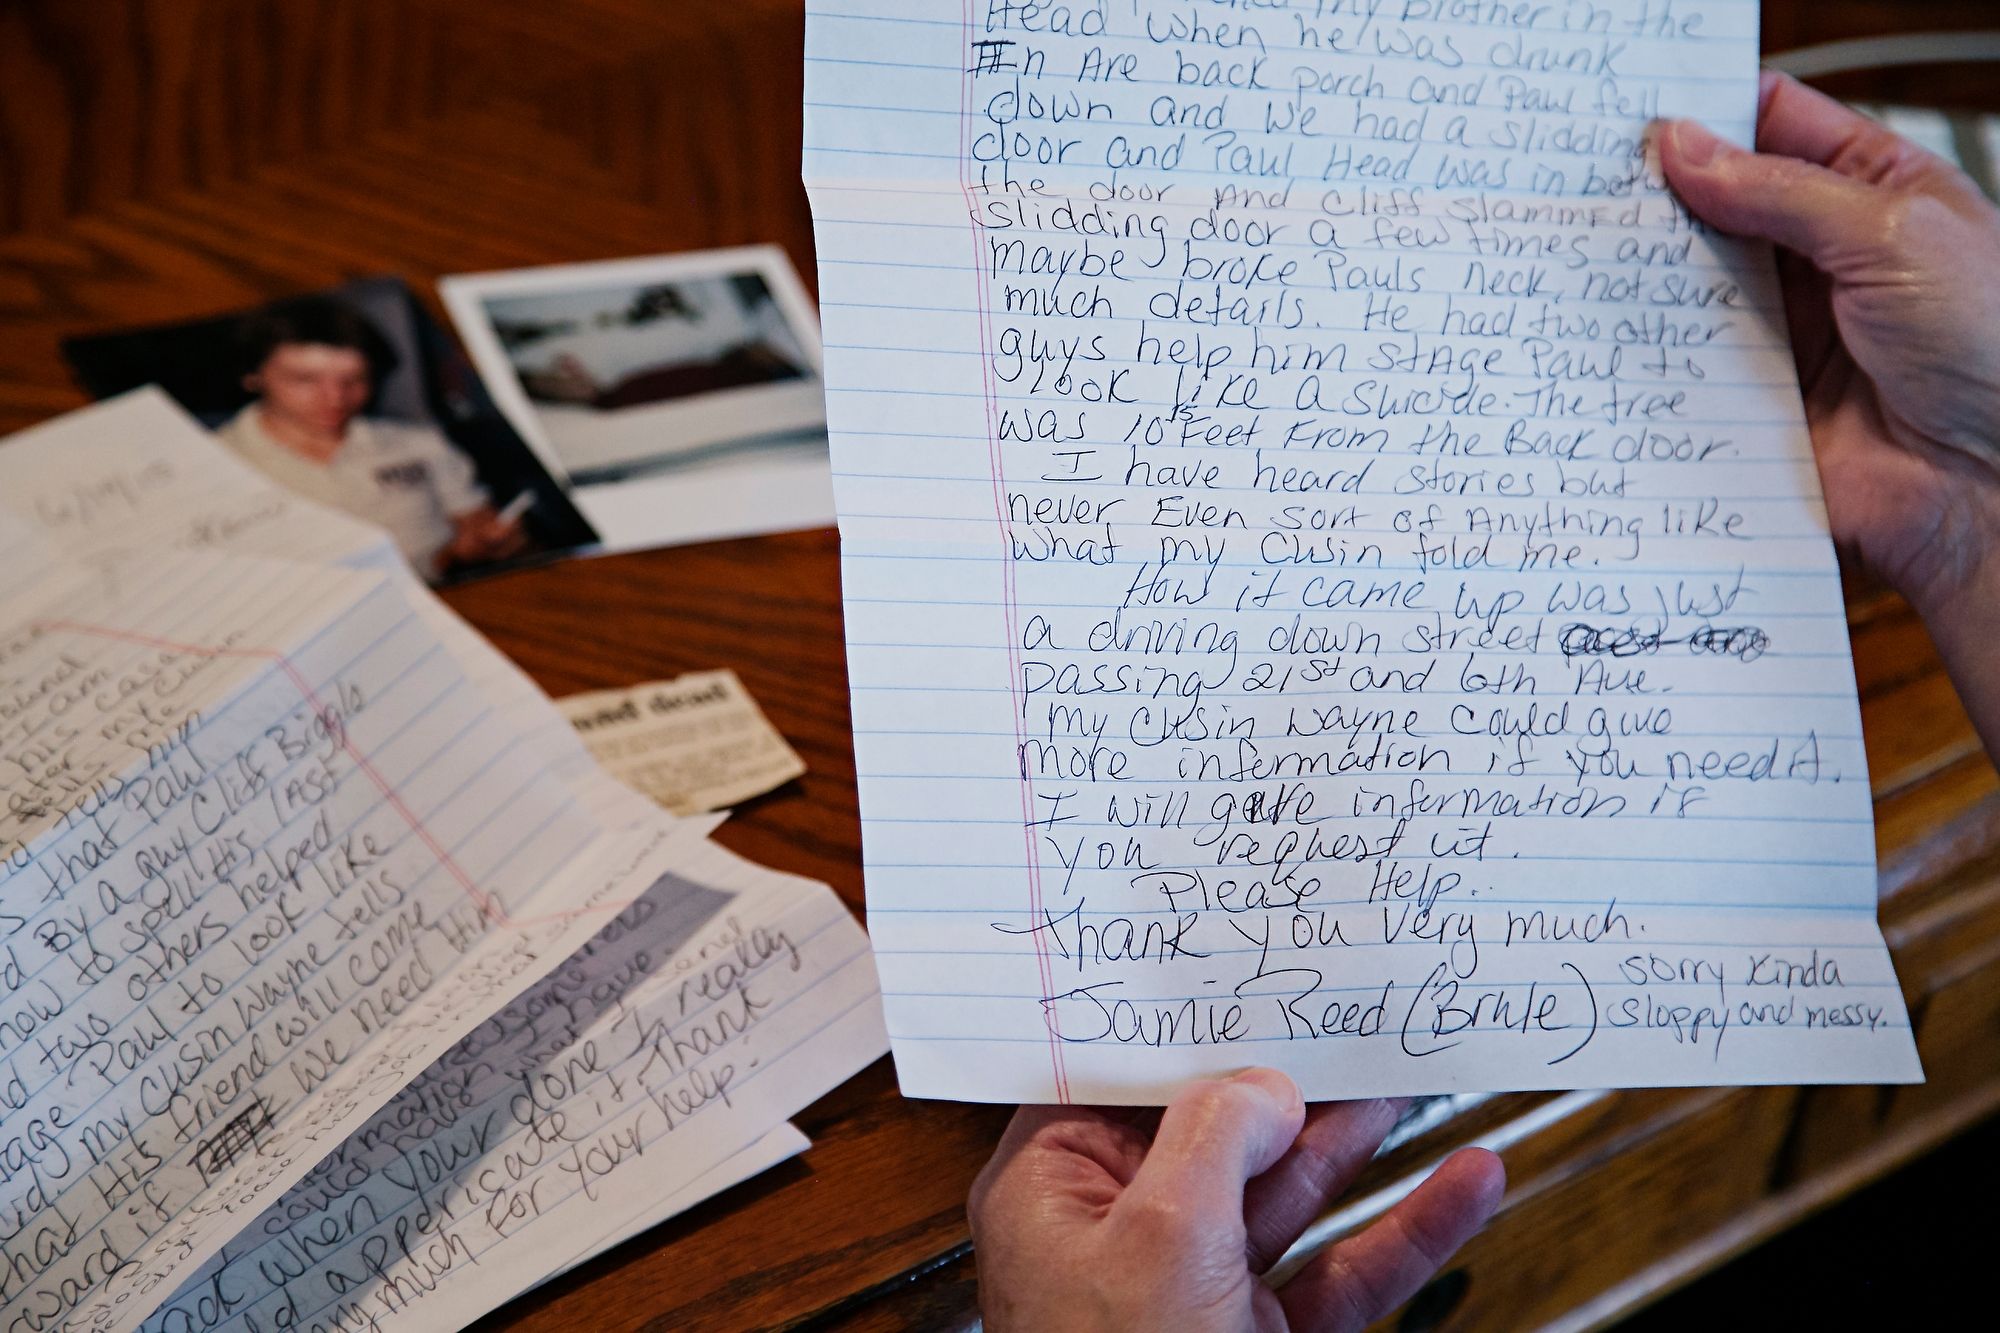 Jody Ewing shares a past letter from someone requesting her help on a cold case.